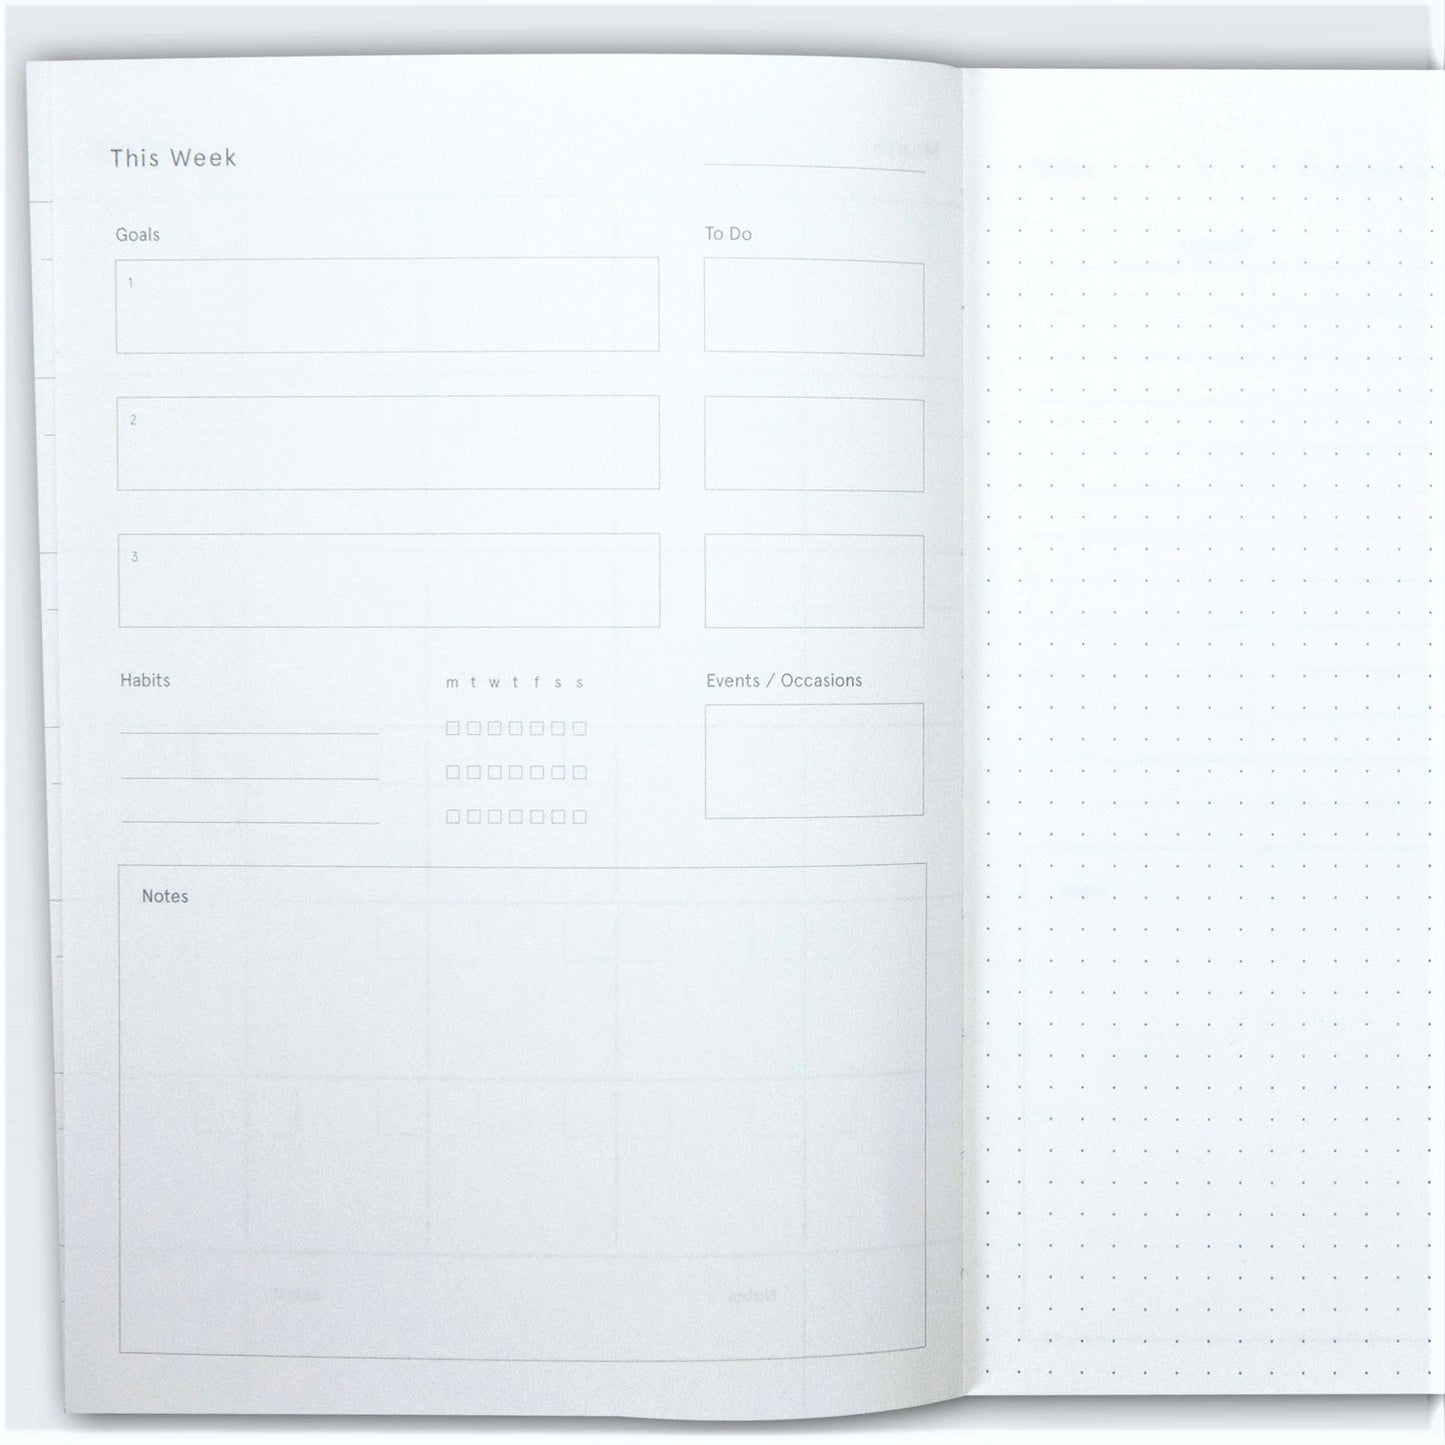 A5 softback 12 week daily planner, pictured open to show the weekly planning layout